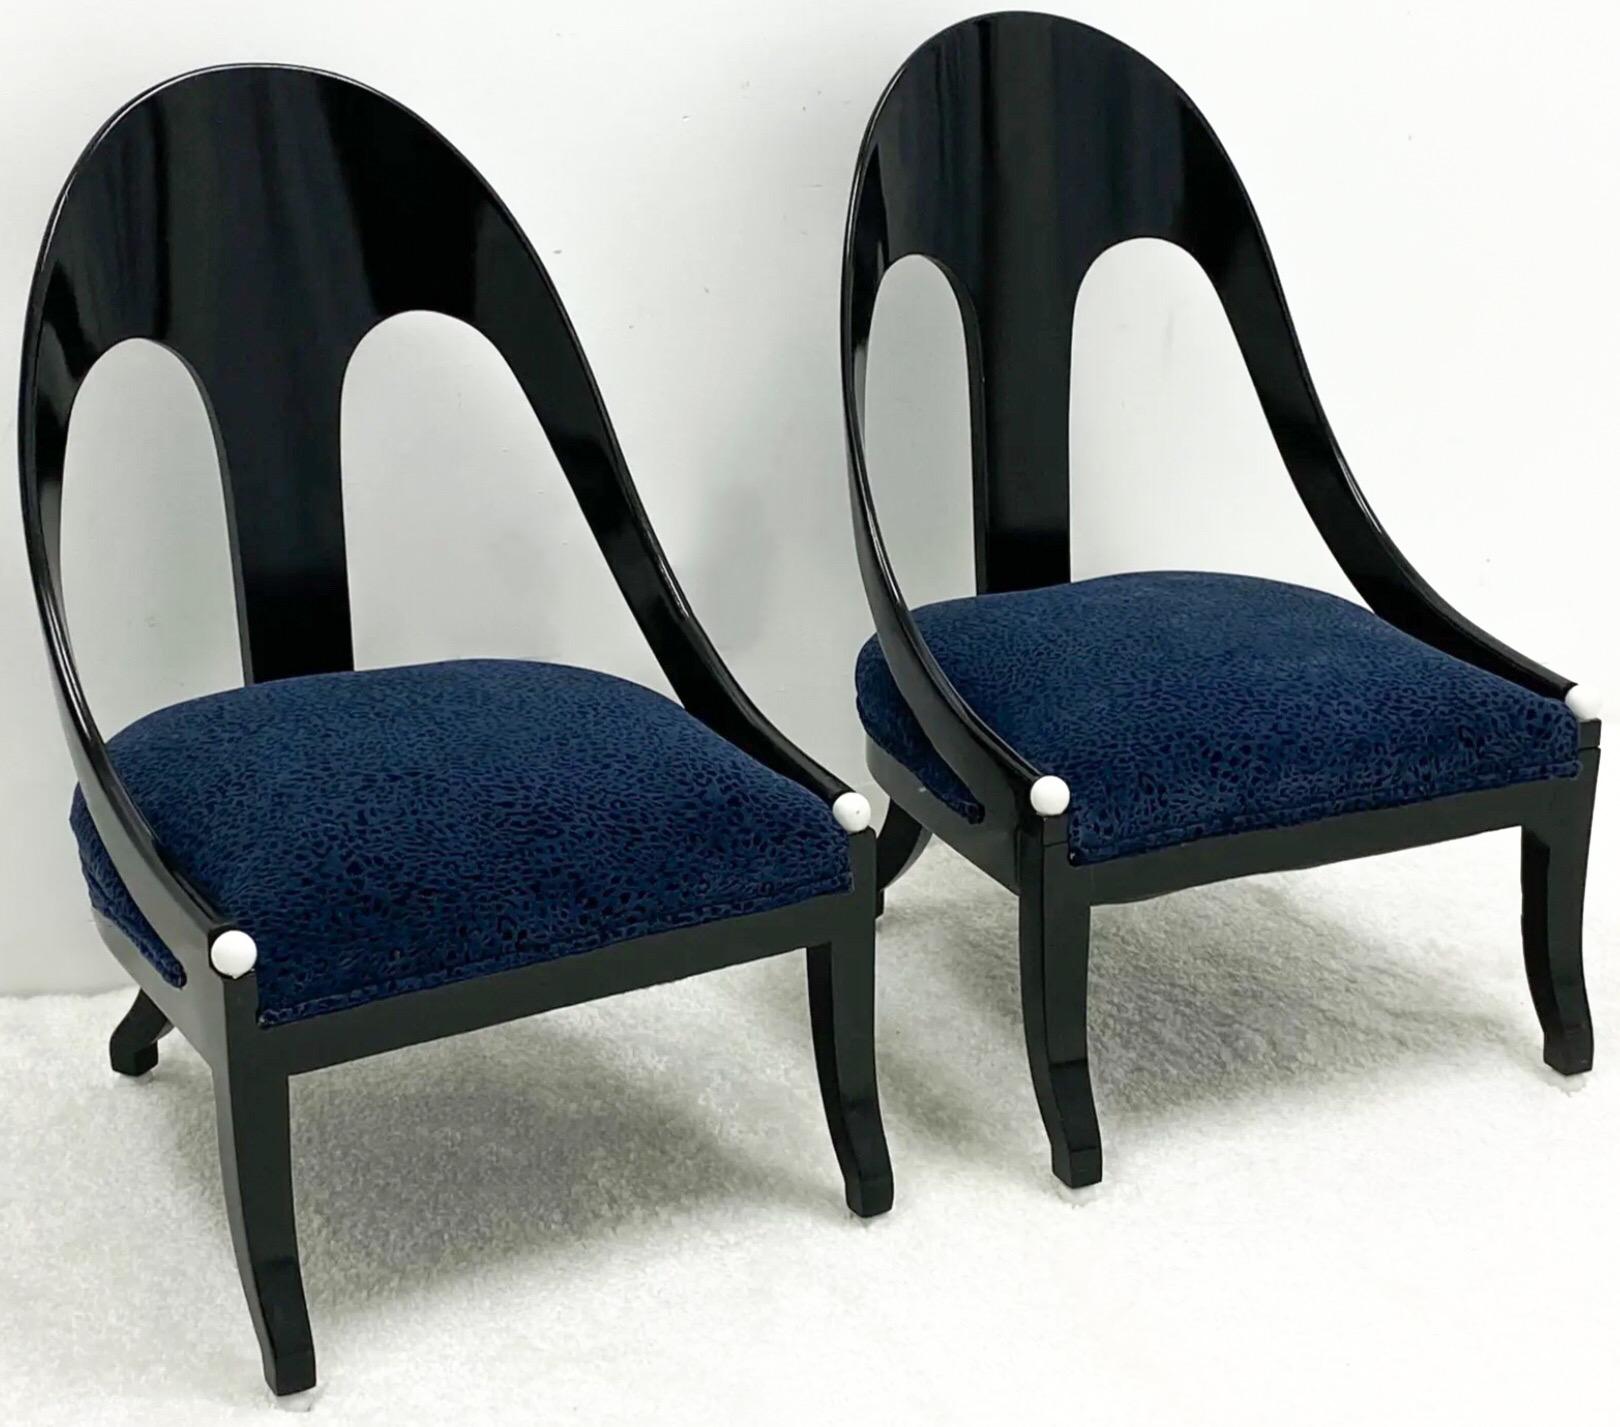 American Mid-Century Modern Lacquered Horseshoe Back Chairs Att. to Baker Furniture, Pair For Sale